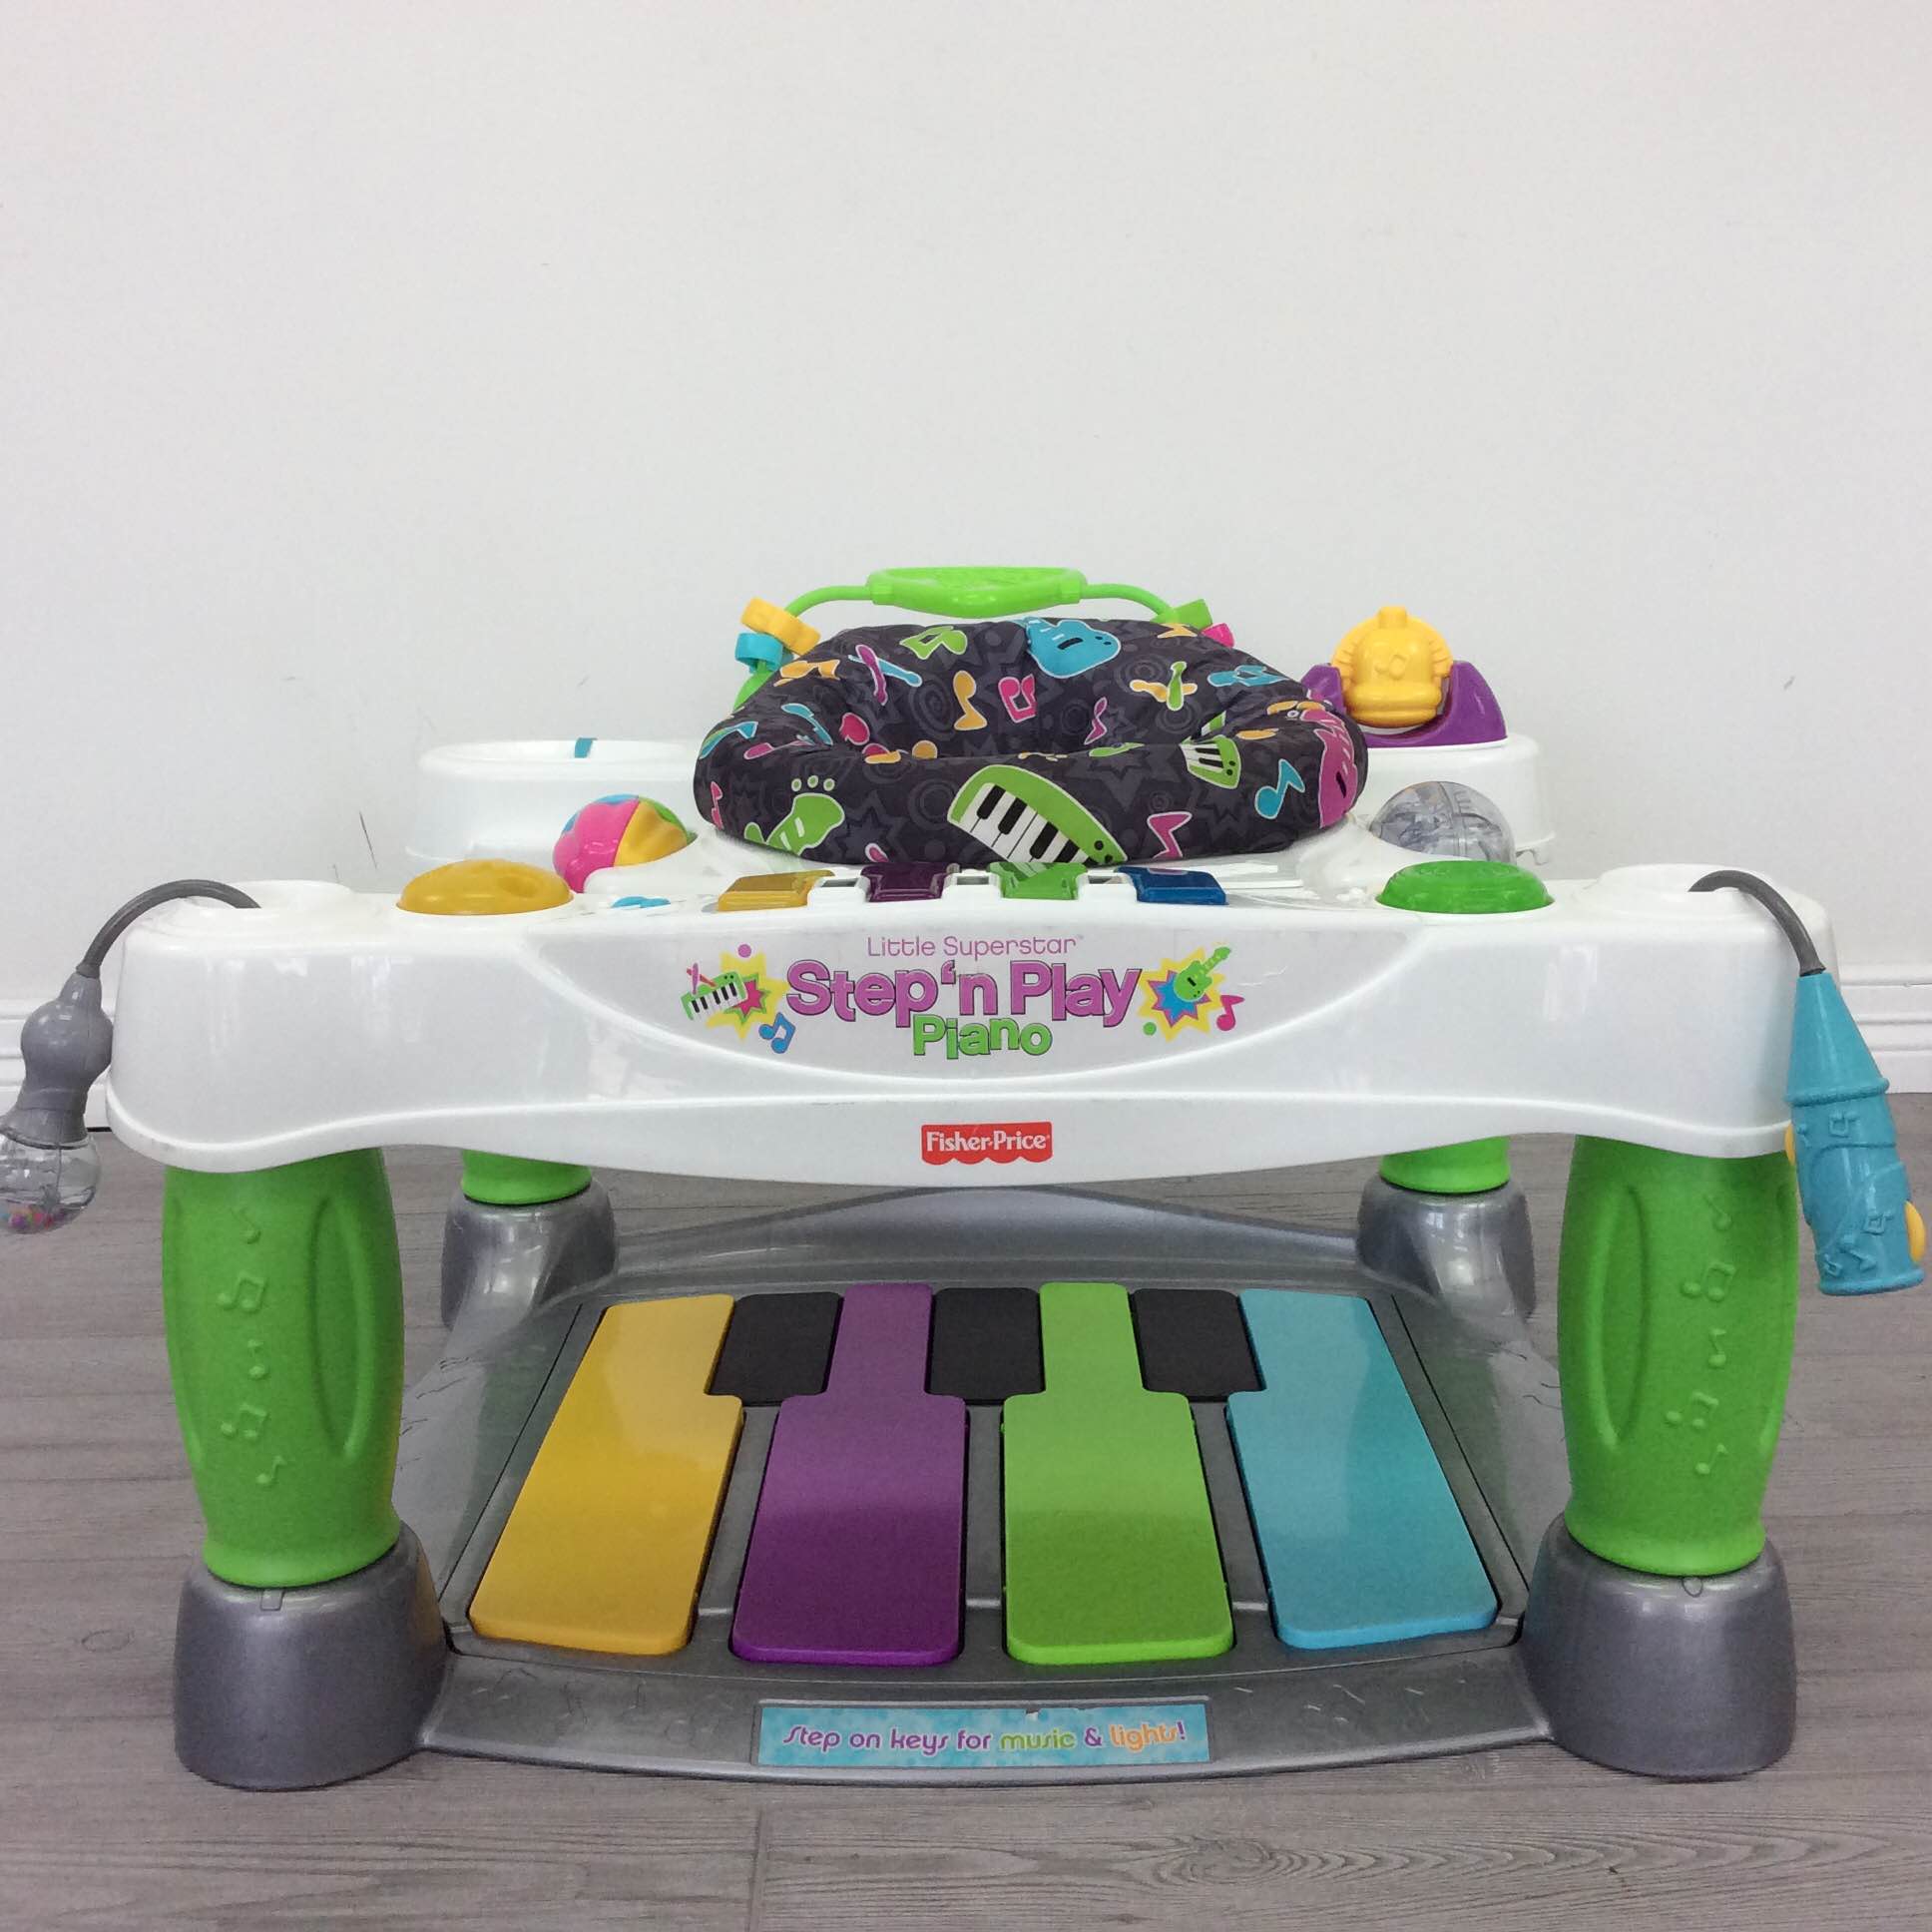 Fisher Price Little Superstar Step 'n Play Piano